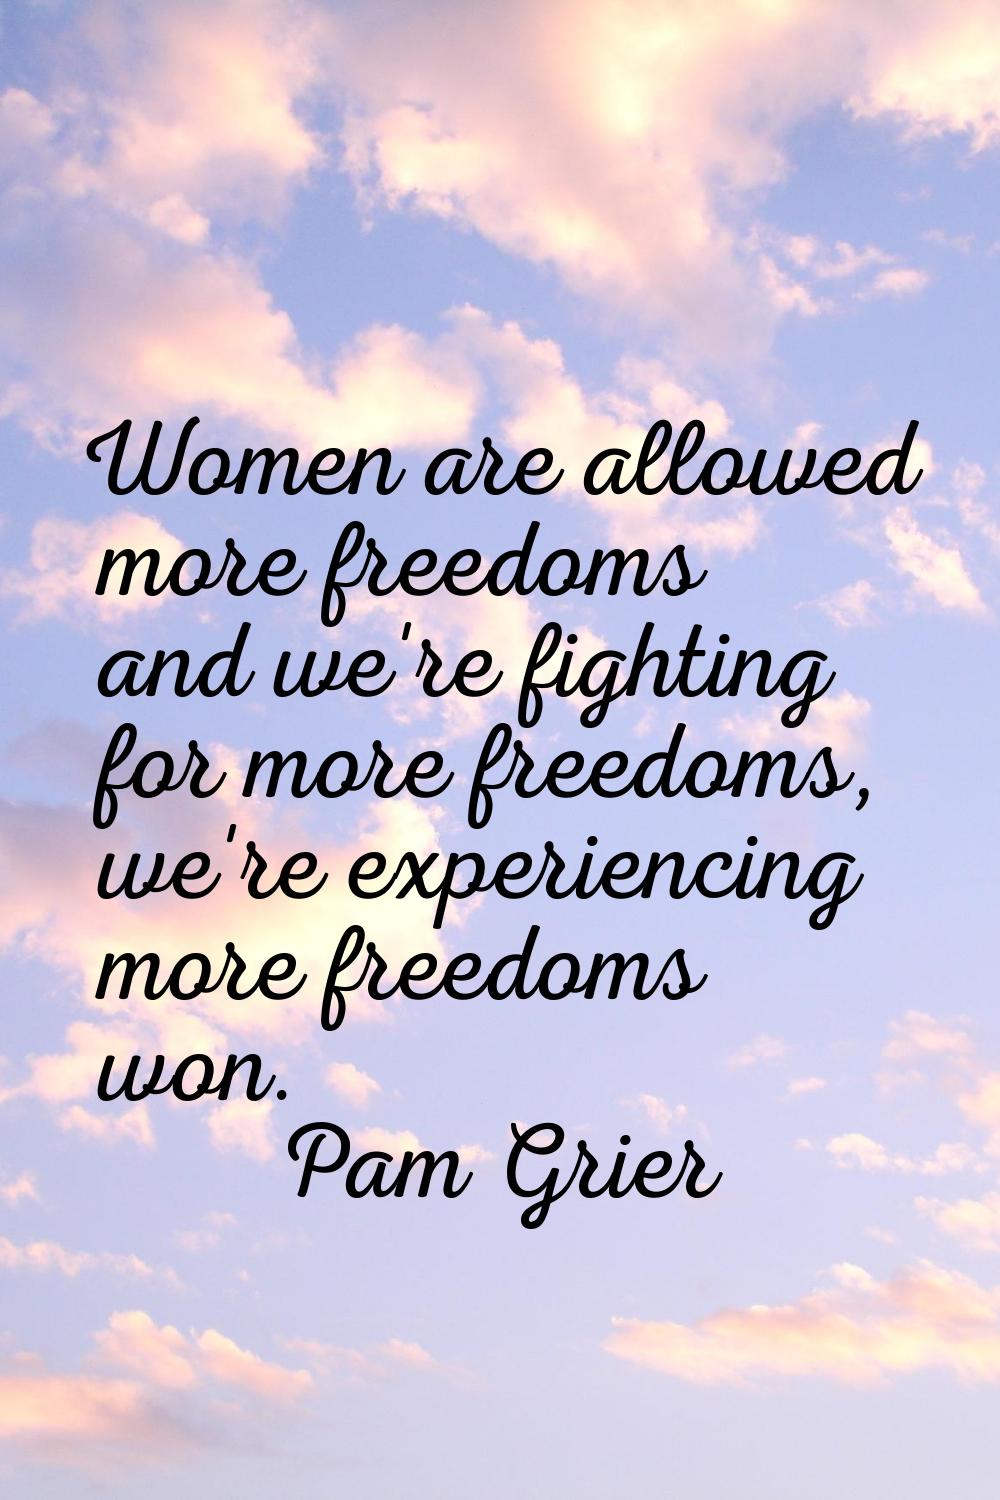 Women are allowed more freedoms and we're fighting for more freedoms, we're experiencing more freed